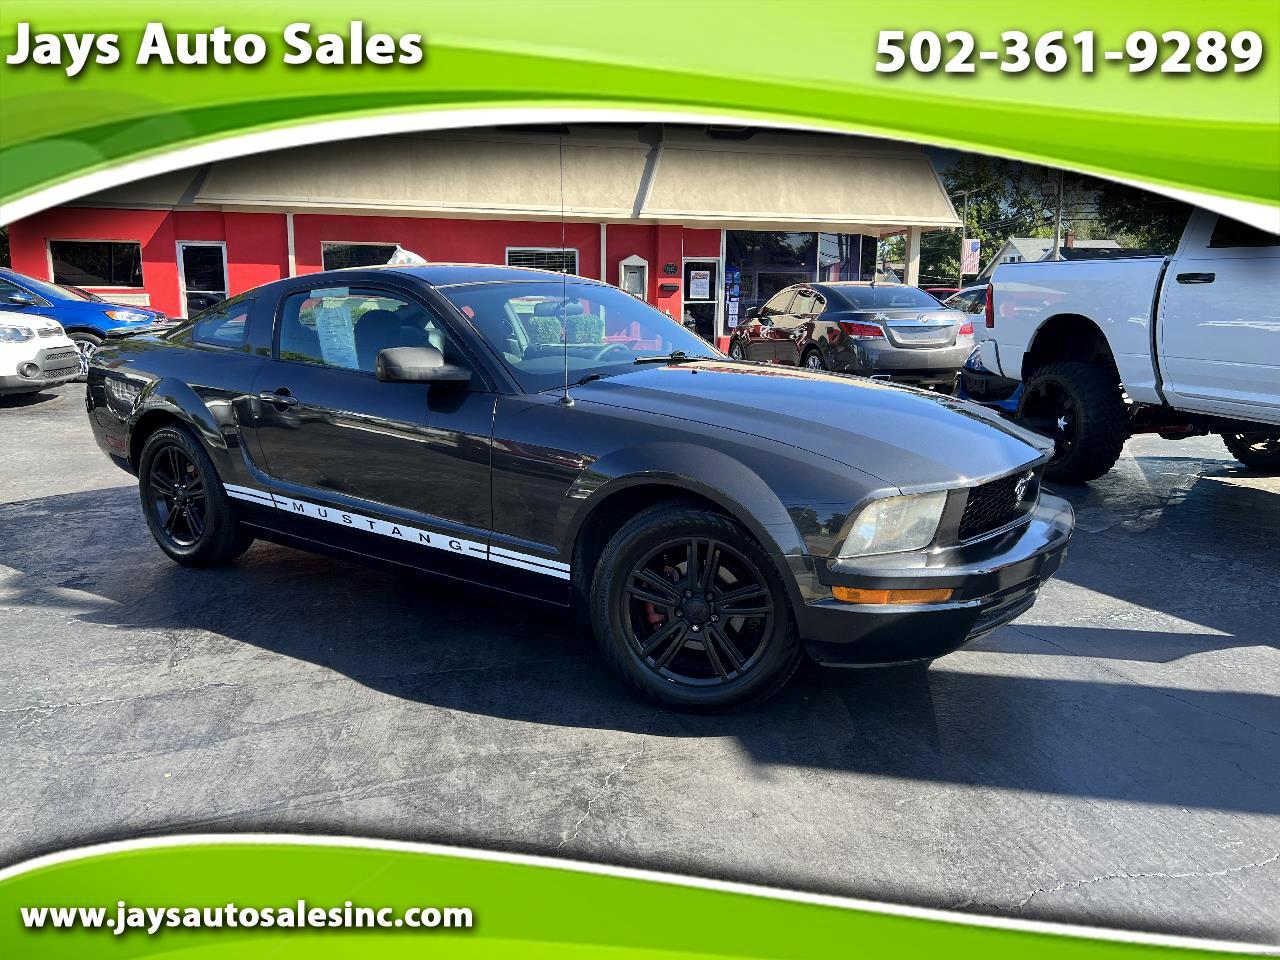 Ford Mustang V6 Premium Coupe 2008